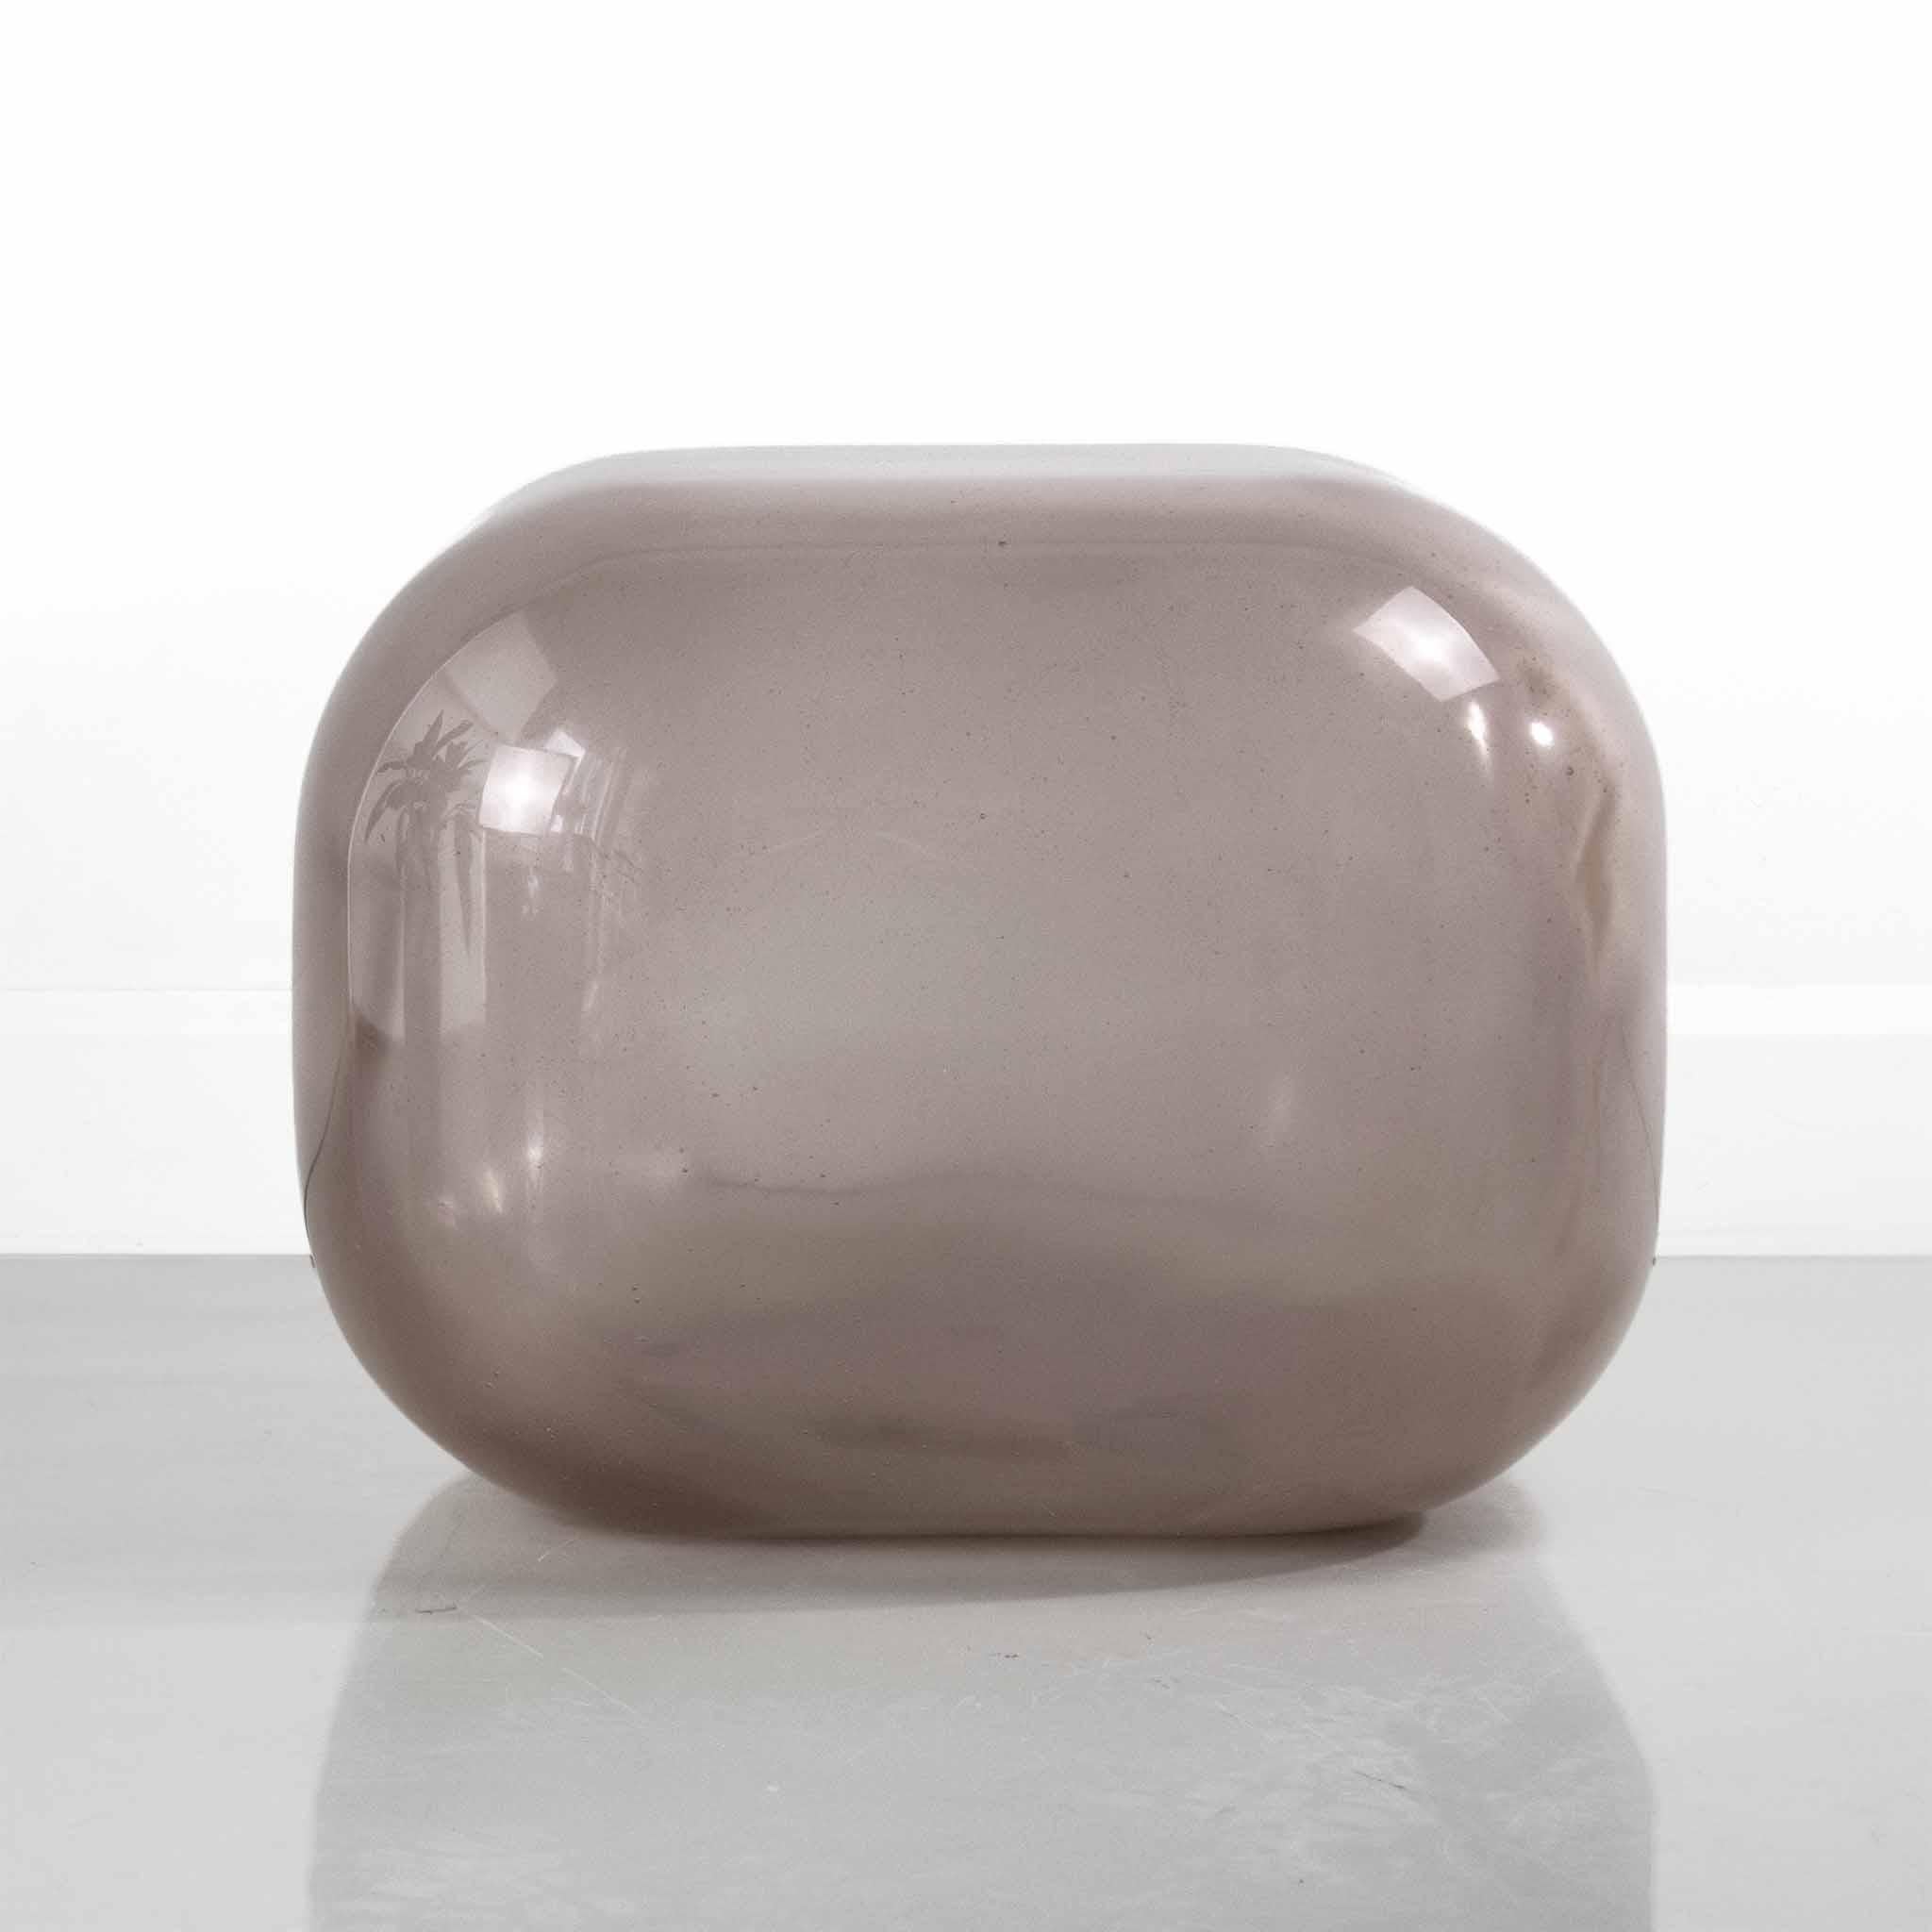 Stone Oort Resin Side Table by Creators Of Objects
Materials: Resin, pigment
DImensions: W 51 x D 51 x H 40 cm
Also Available: Tourmaline, Bordeaux, Spice, Ochre, Forest, Ocean, Twilight, Rock, Lilac, Cerise, Coral Spice, Honey, Moss, Surf, Eve,